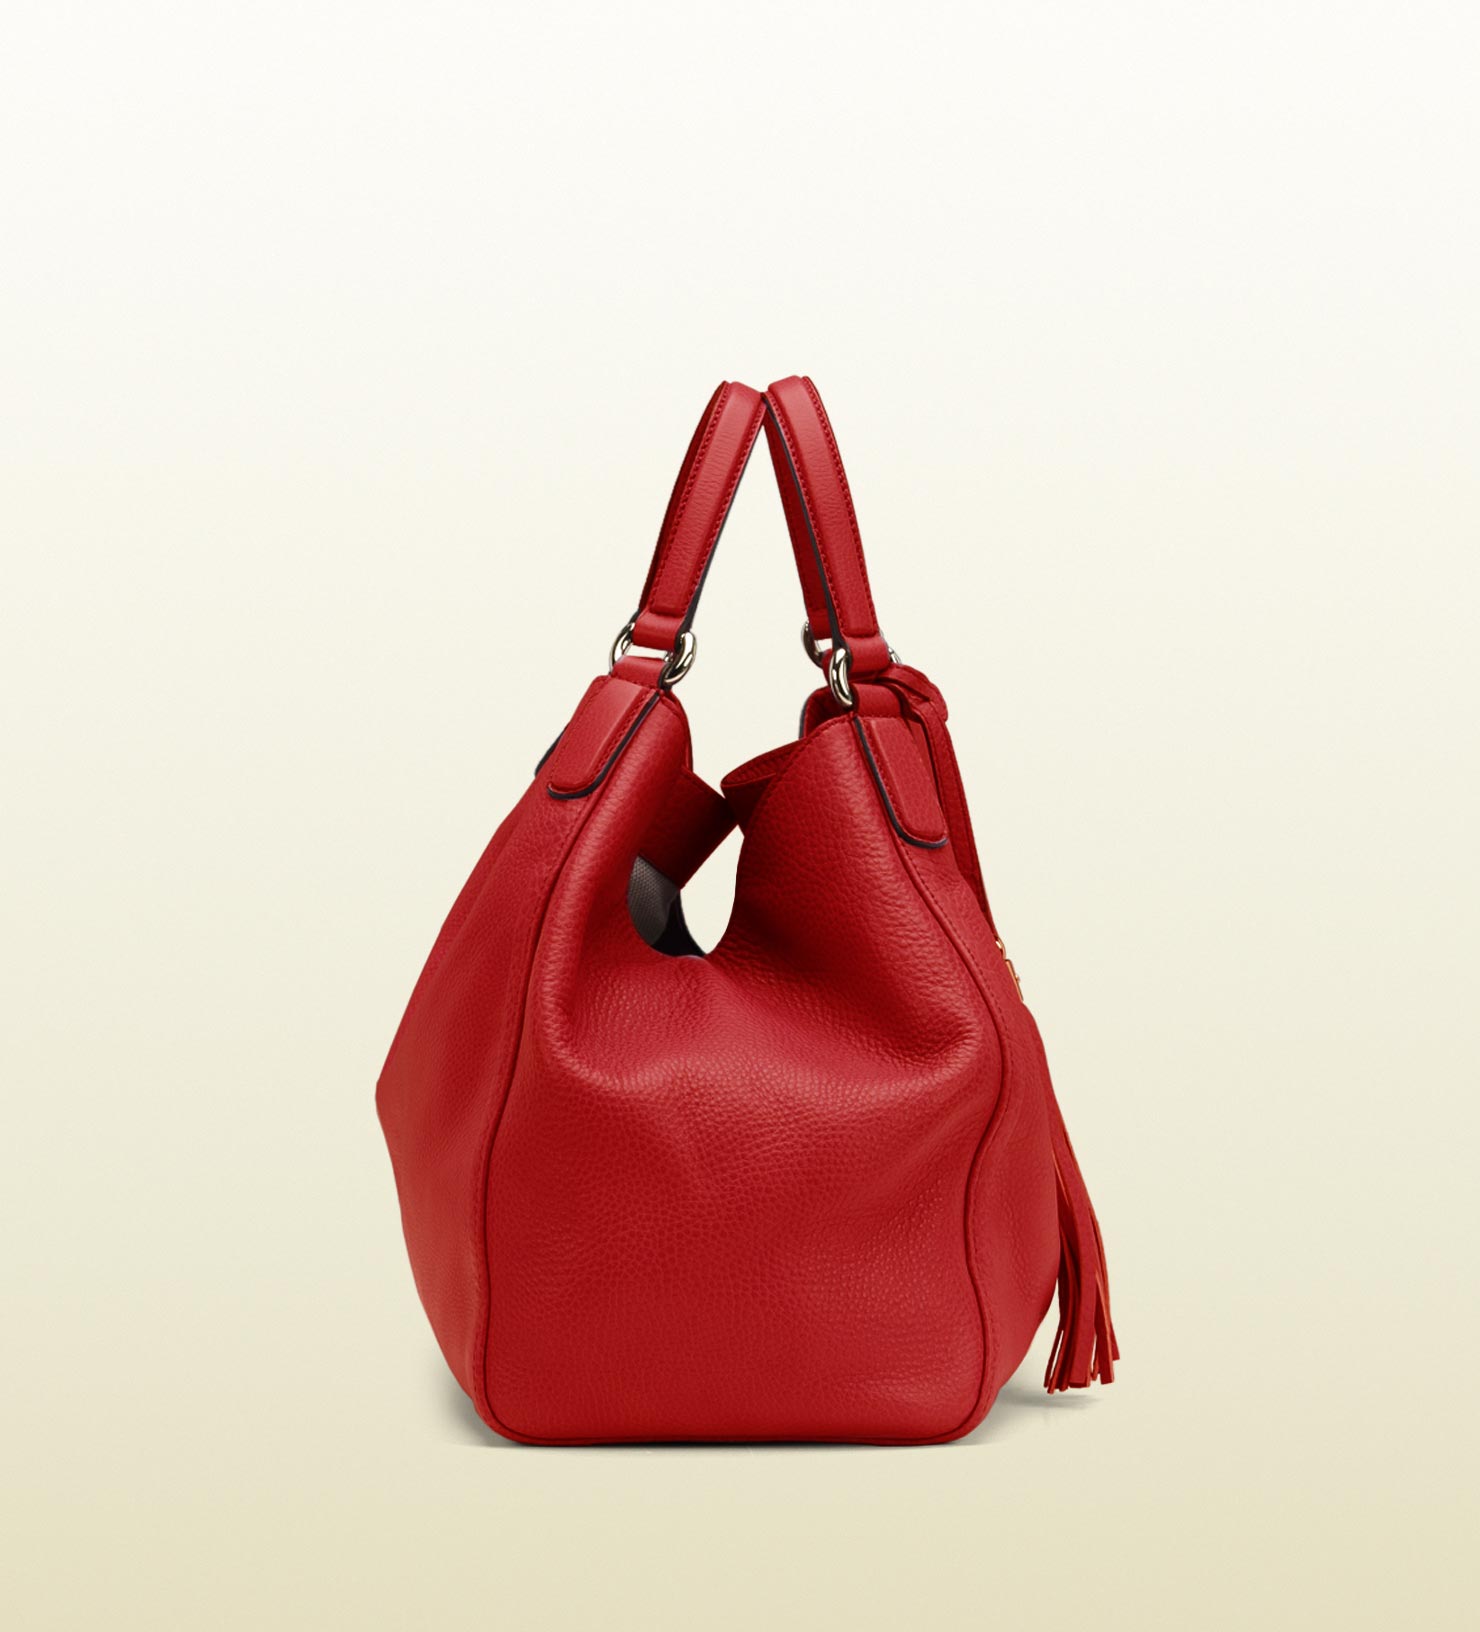 Lyst - Gucci Soho Leather Shoulder Bag in Red